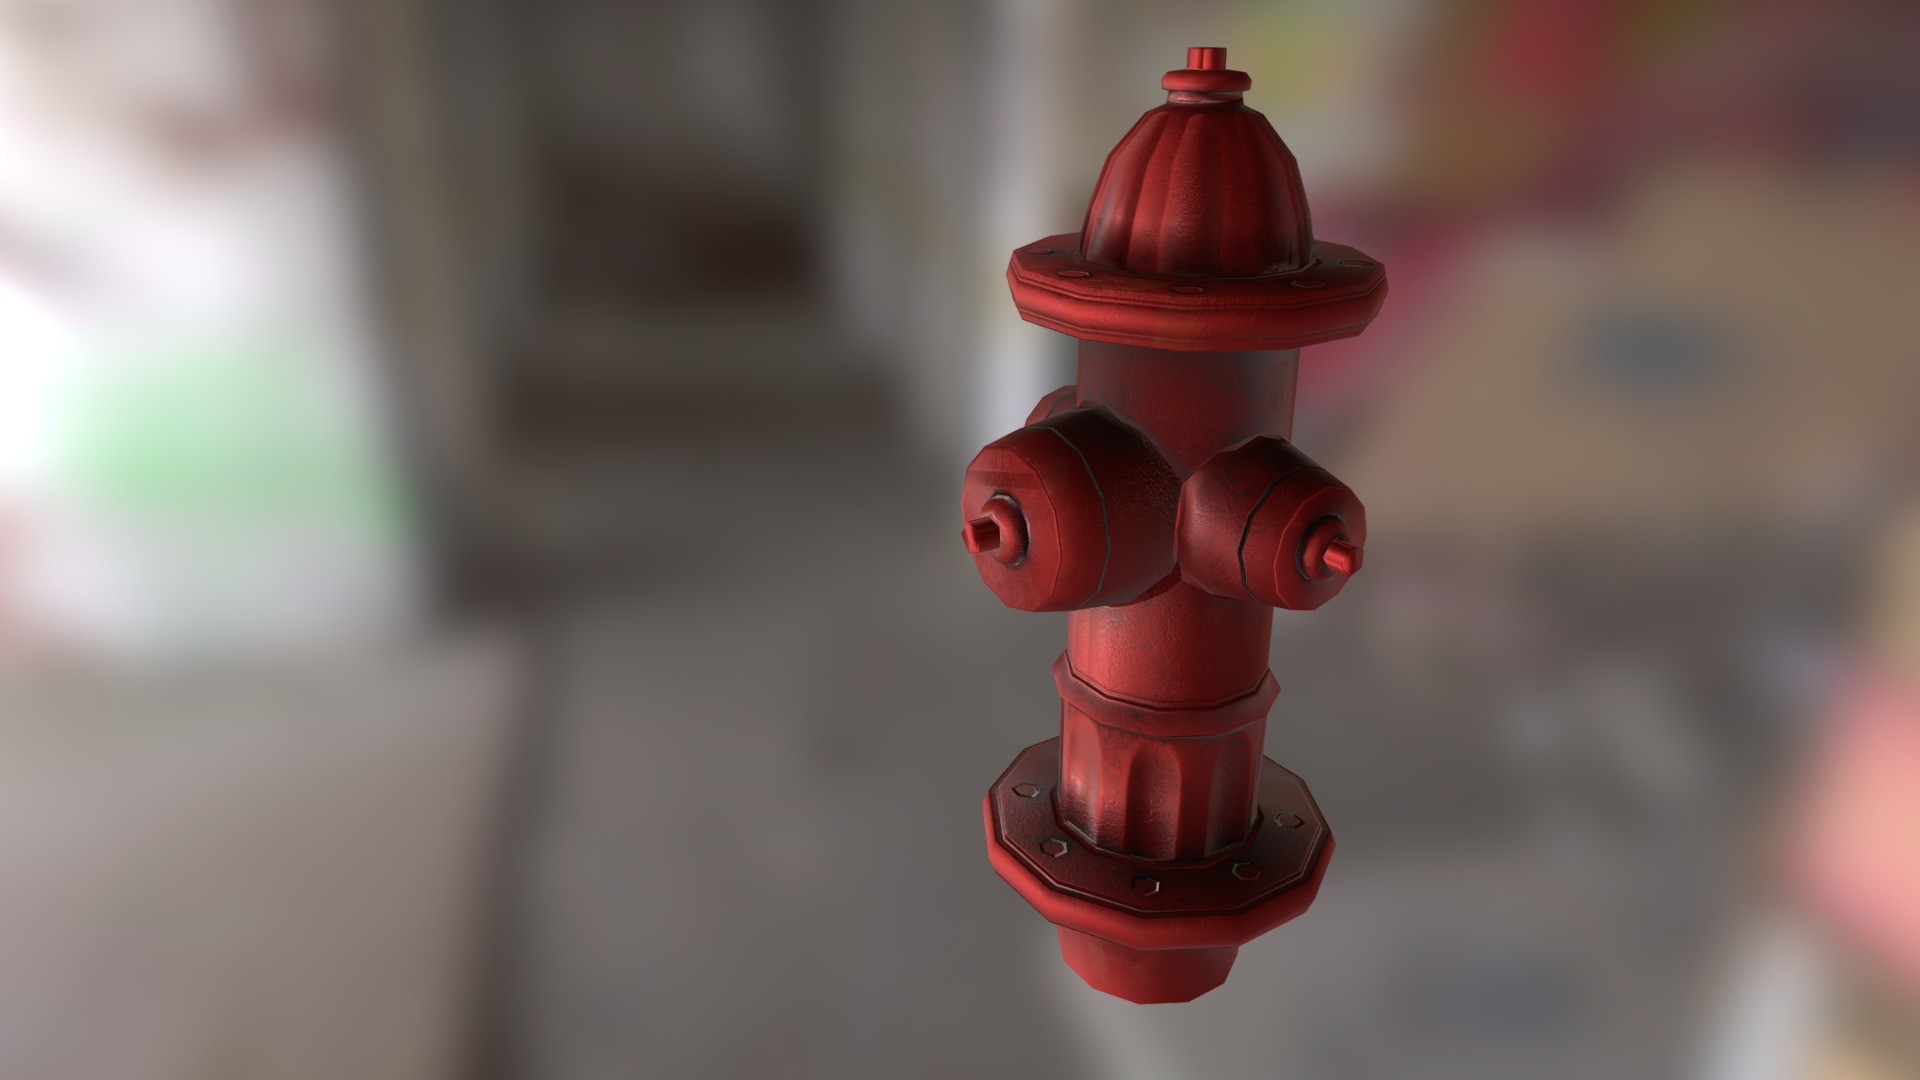 3D model Fire Hydrant – Low Poly - This is a 3D model of the Fire Hydrant - Low Poly. The 3D model is about a red fire hydrant.